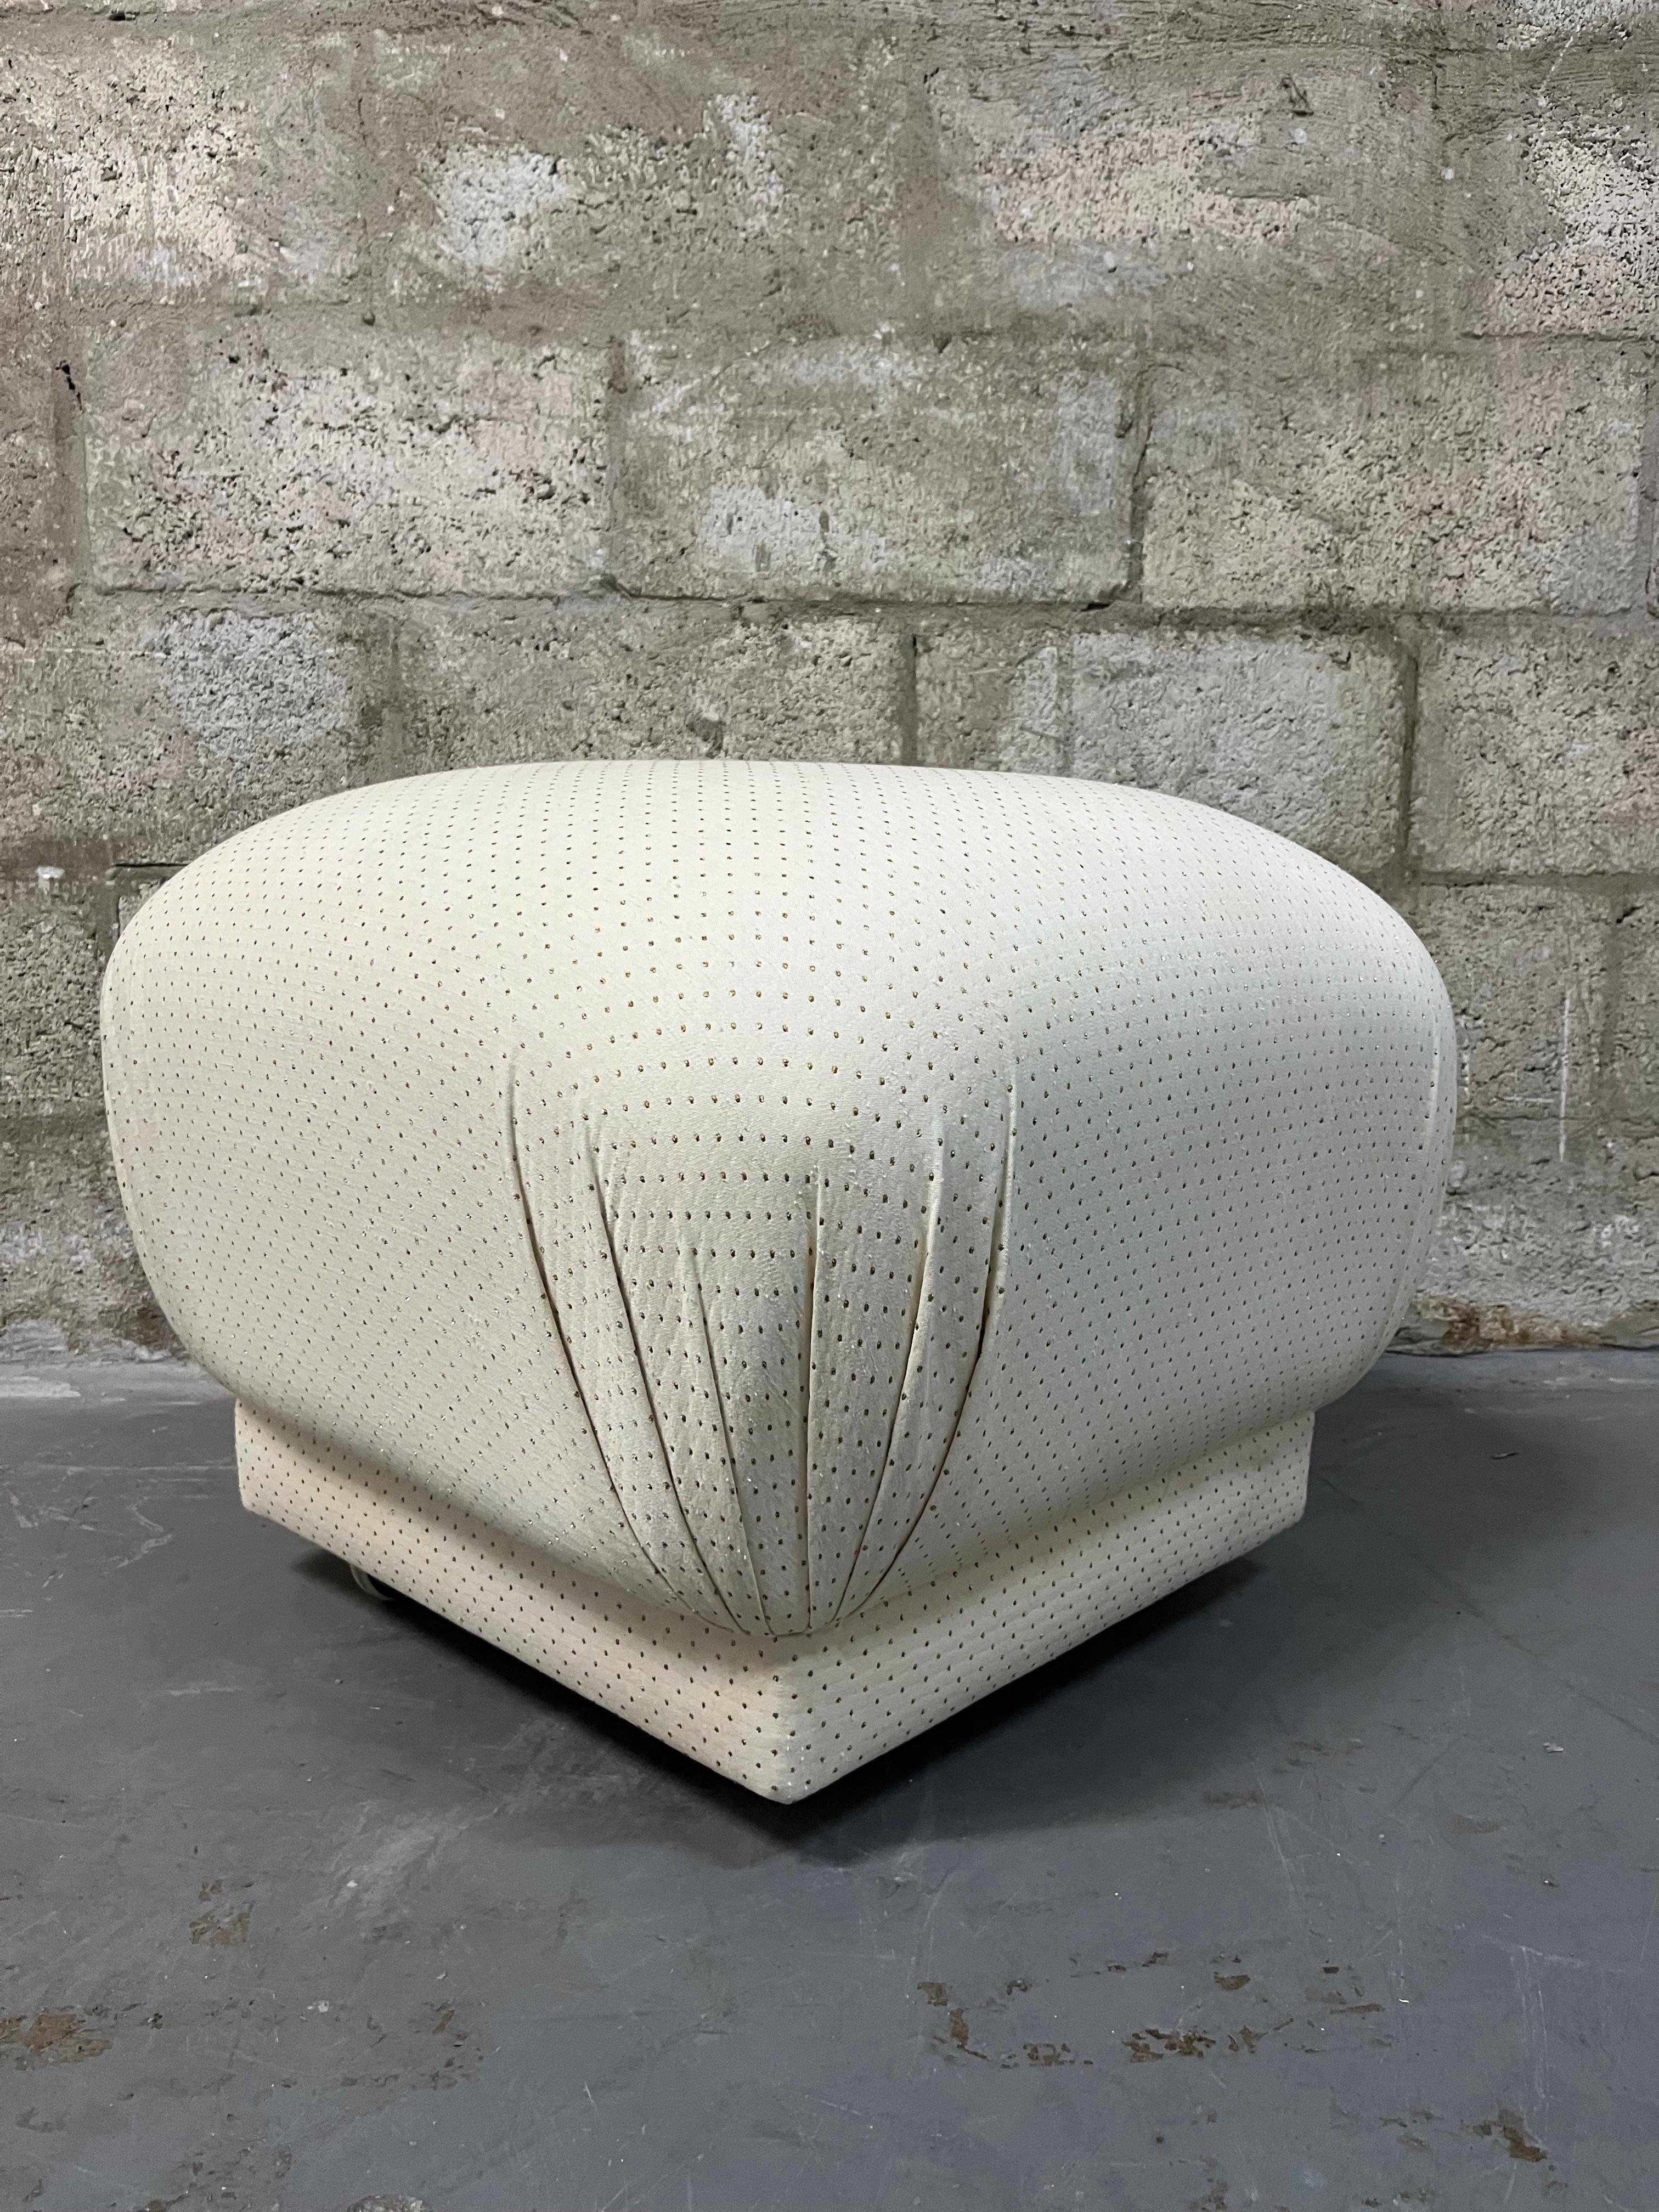 Vintage Hollywood Regency / 1980s Art Deco Revival  Souffle Ottoman Pouf With Casters in the Karl Springer Style.
Features the original cream upholstery with gold dots and brass plated casters for easier mobility. 
In excellent original condition